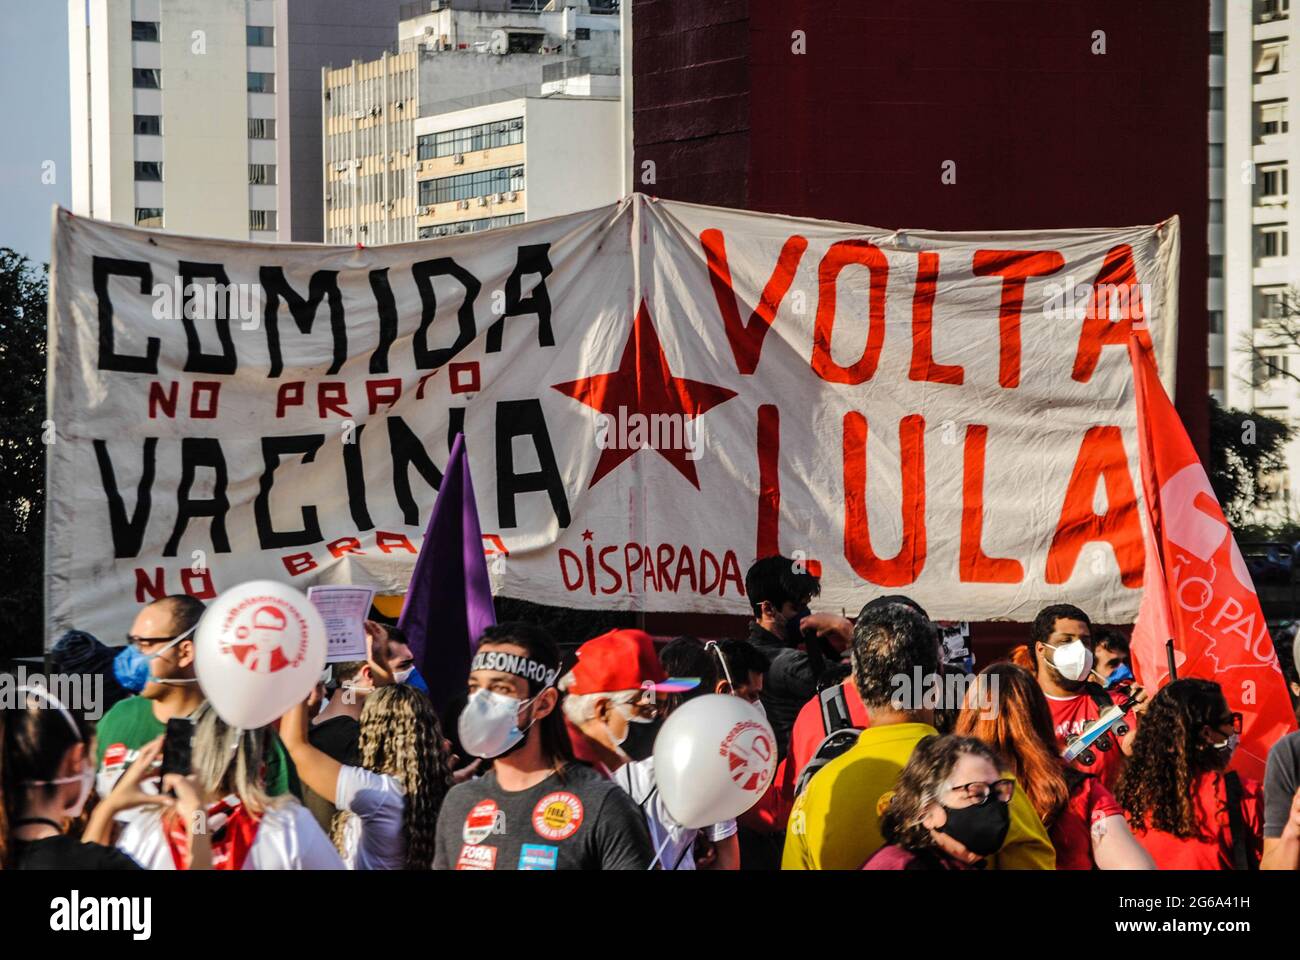 https://c8.alamy.com/comp/2G6A41H/july-3-2021-sao-paulo-sao-paulo-brasil-int-protest-against-bolsonaro-in-sao-paulo-july-3-2021-sao-paulo-brazil-protesters-linked-to-unions-and-left-wing-parties-and-with-the-presence-of-fernando-haddad-presidential-candidate-for-the-pt-in-the-2018-elections-and-gleisi-hoffmann-federal-deputy-and-president-of-the-workers-party-pt-protest-against-brazilian-president-jair-bolsonaro-on-the-streets-of-avenida-paulista-on-saturday-3-in-addition-to-protesting-against-the-federal-government-with-posters-and-banners-the-protesters-asked-for-more-agility-in-the-vaccination-agains-2G6A41H.jpg